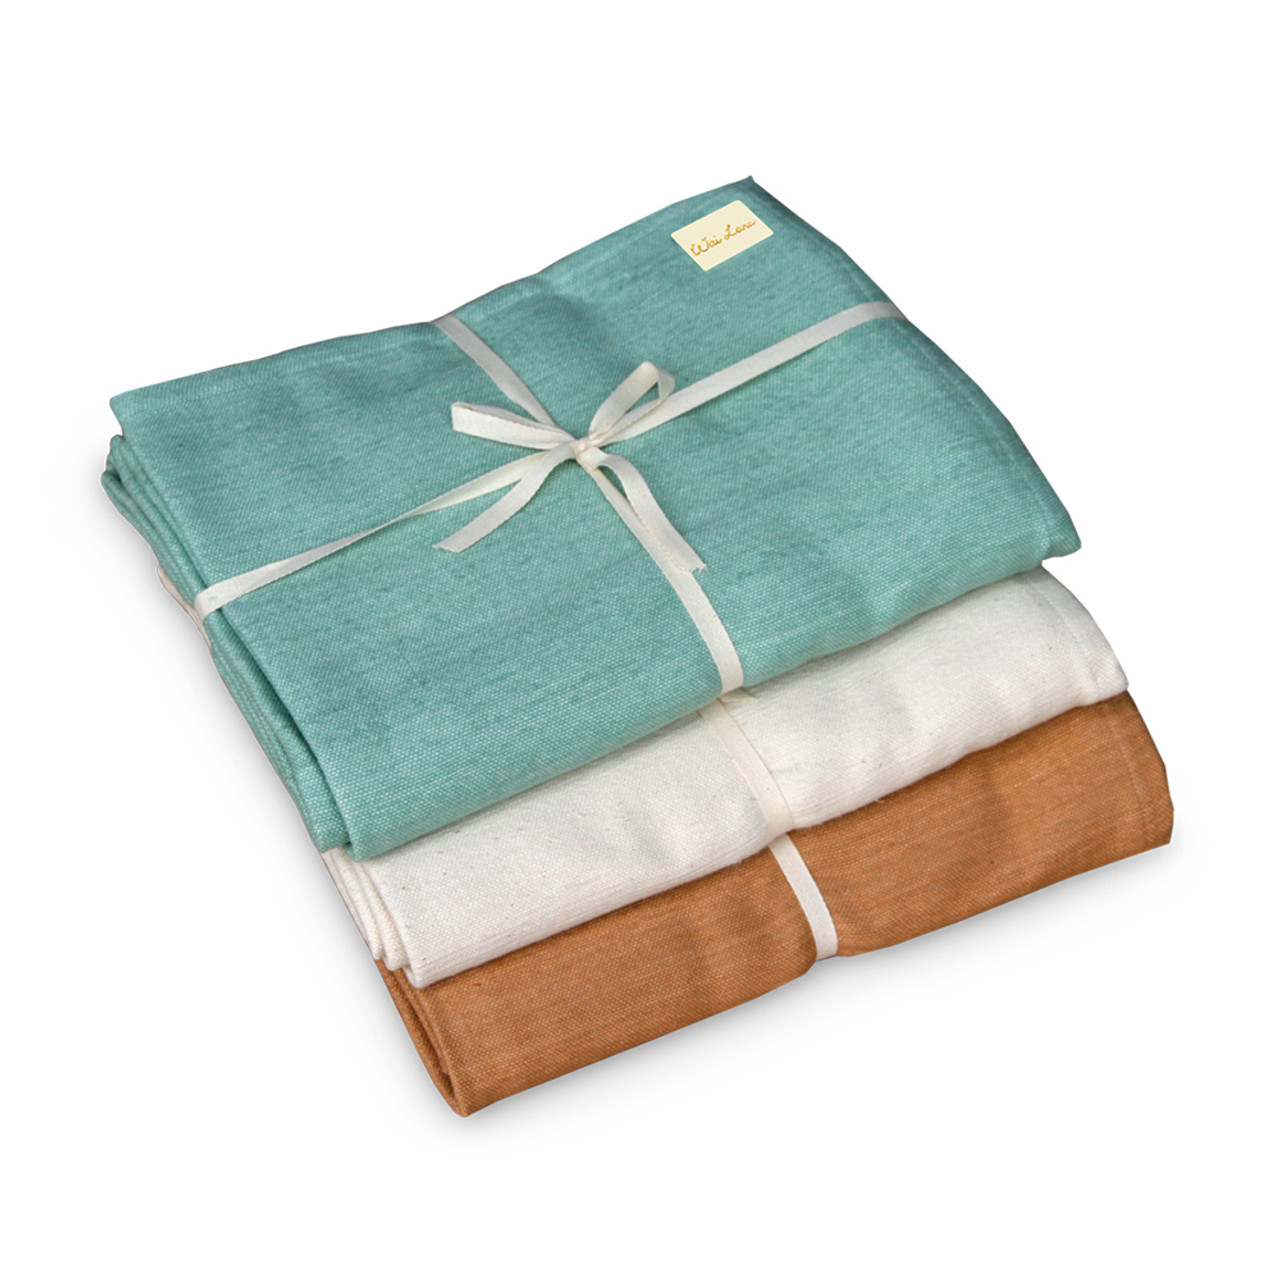 https://cdn11.bigcommerce.com/s-nw401/images/stencil/1280x1280/products/397/684/1003_1001_1002_Cozy_Cotton_Yoga_Blanket__60526.1388630236.jpg?c=2